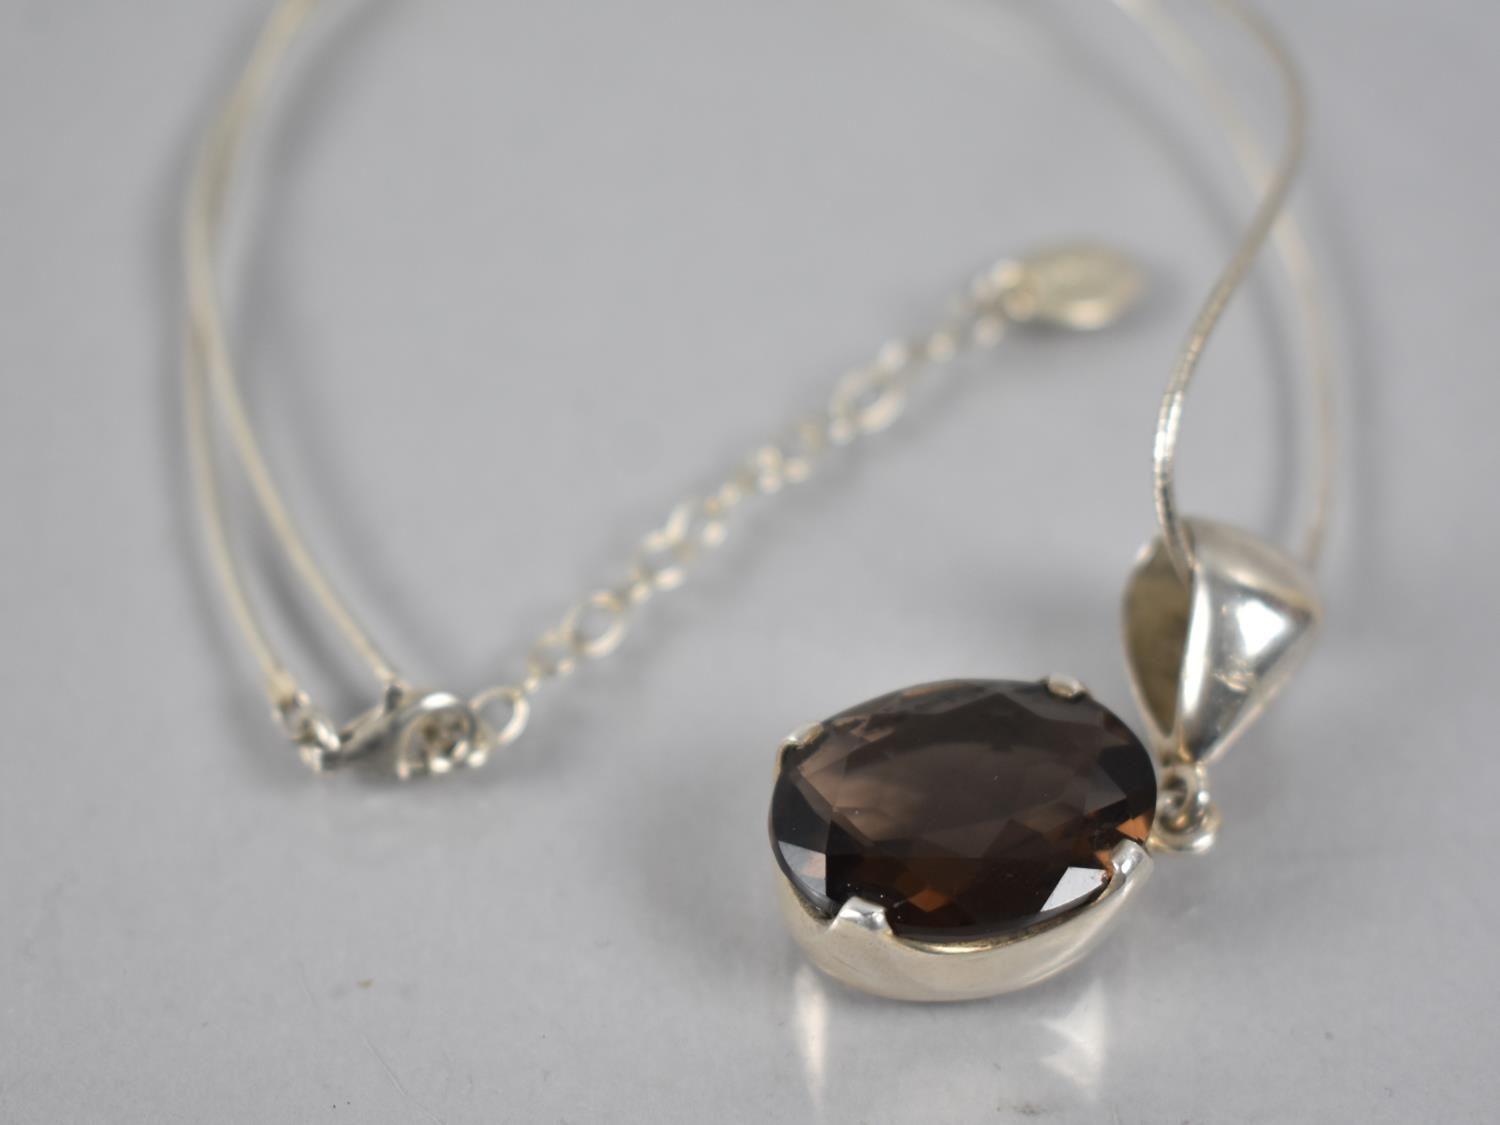 An Italian Silver Necklace by POM, with Large Silver Mounted Smokey Quartz Pendant - Image 2 of 2